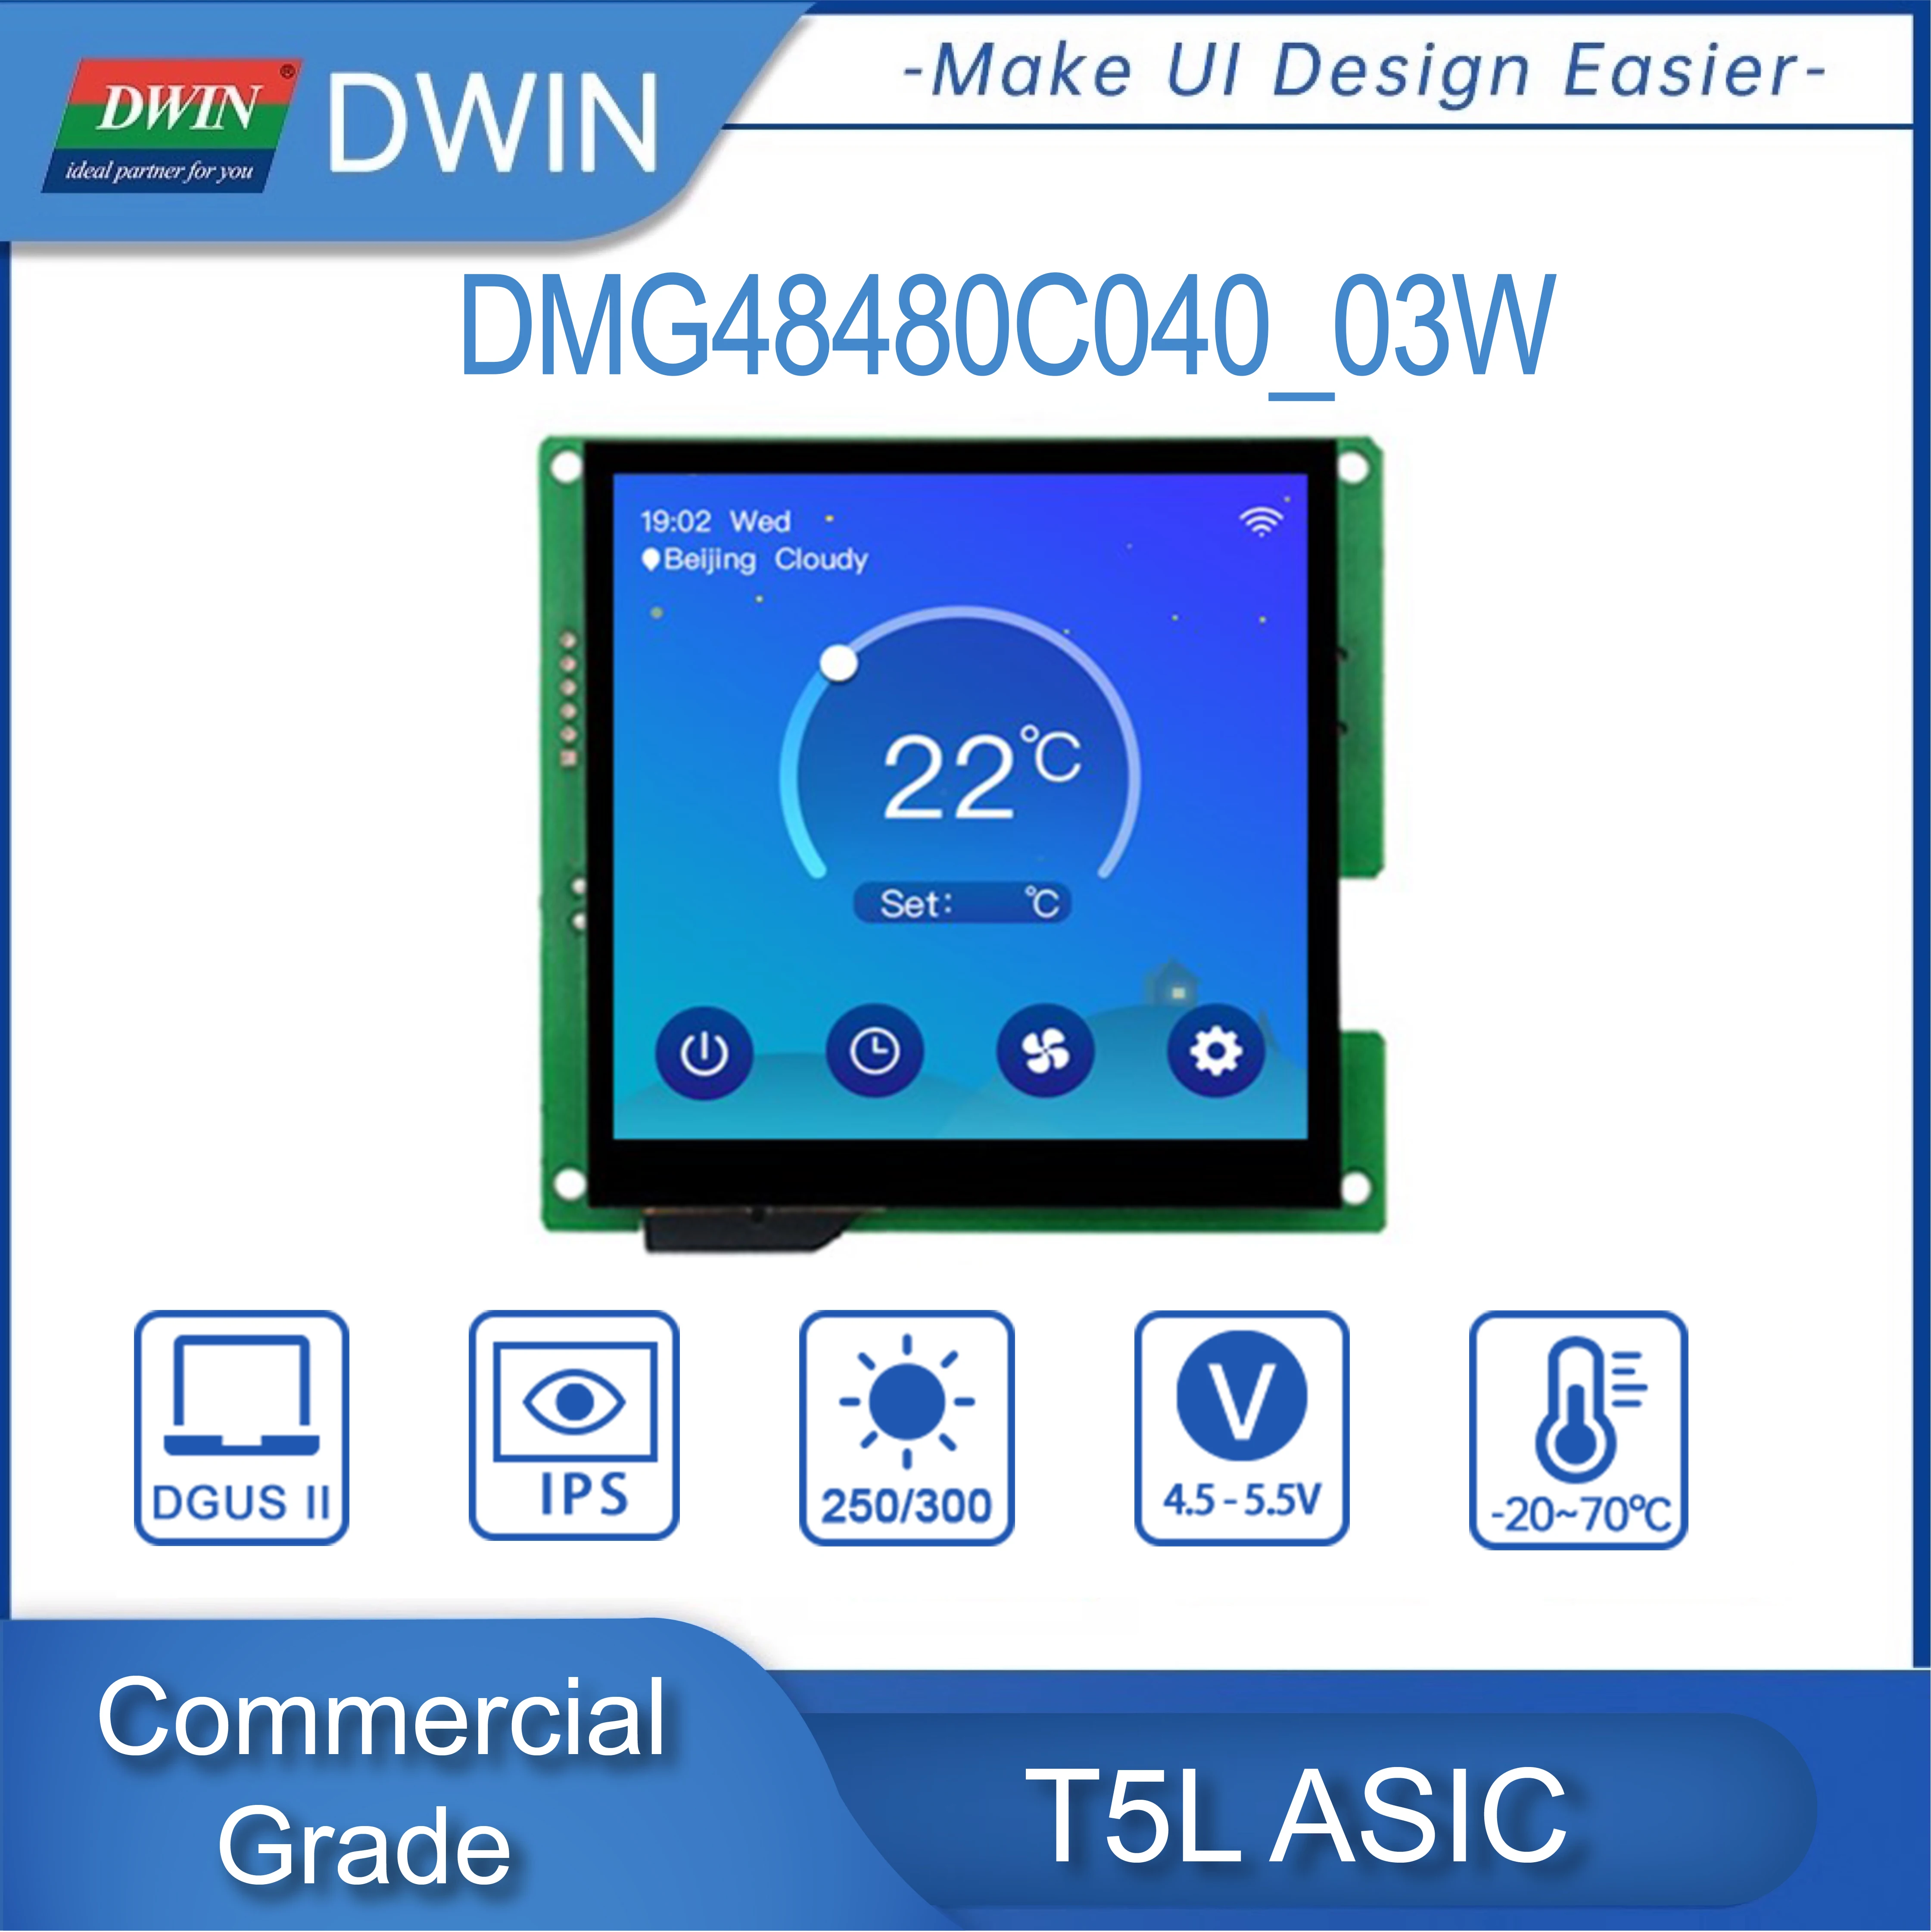 DWIN 4 Inch 480*480 Square LCD Display Commercial Grade HMI Smart Touch Screen UART Serial 250nit LCD Module DMG48480C040_03W